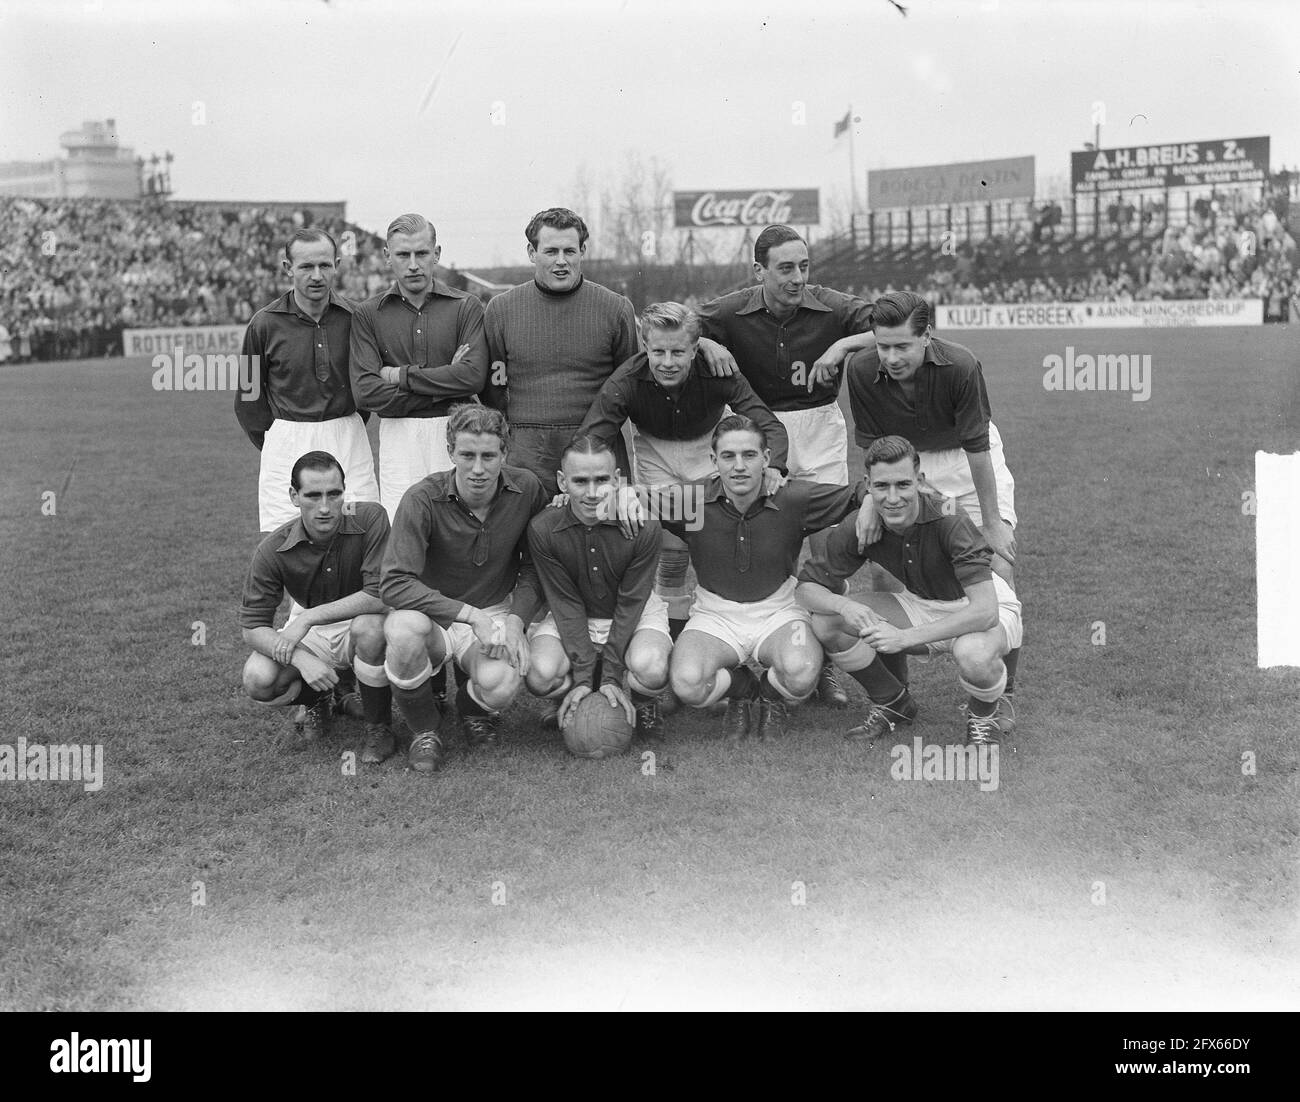 Union team, 18 November 1950, Union teams, The Netherlands, 20th century press agency photo, news to remember, documentary, historic photography 1945-1990, visual stories, human history of the Twentieth Century, capturing moments in time Stock Photo